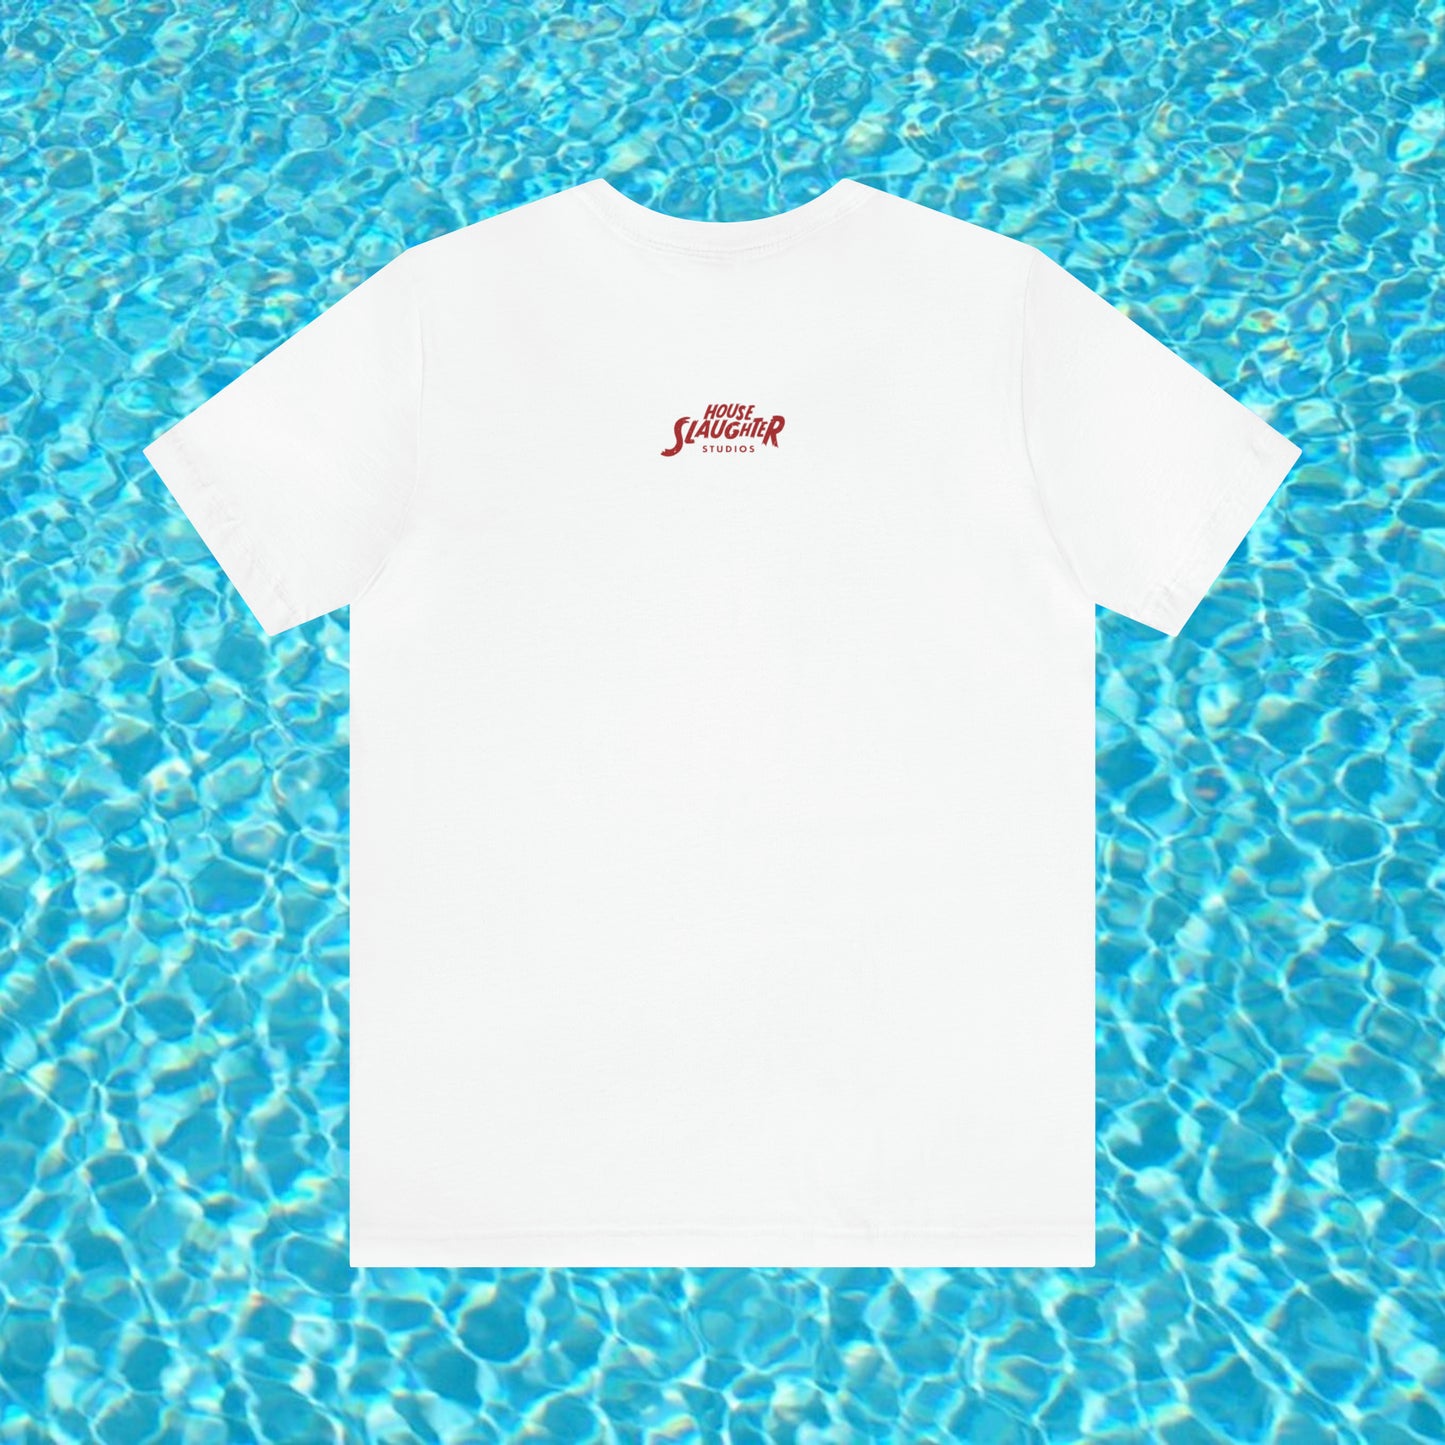 Rancho Mirage Official Tee